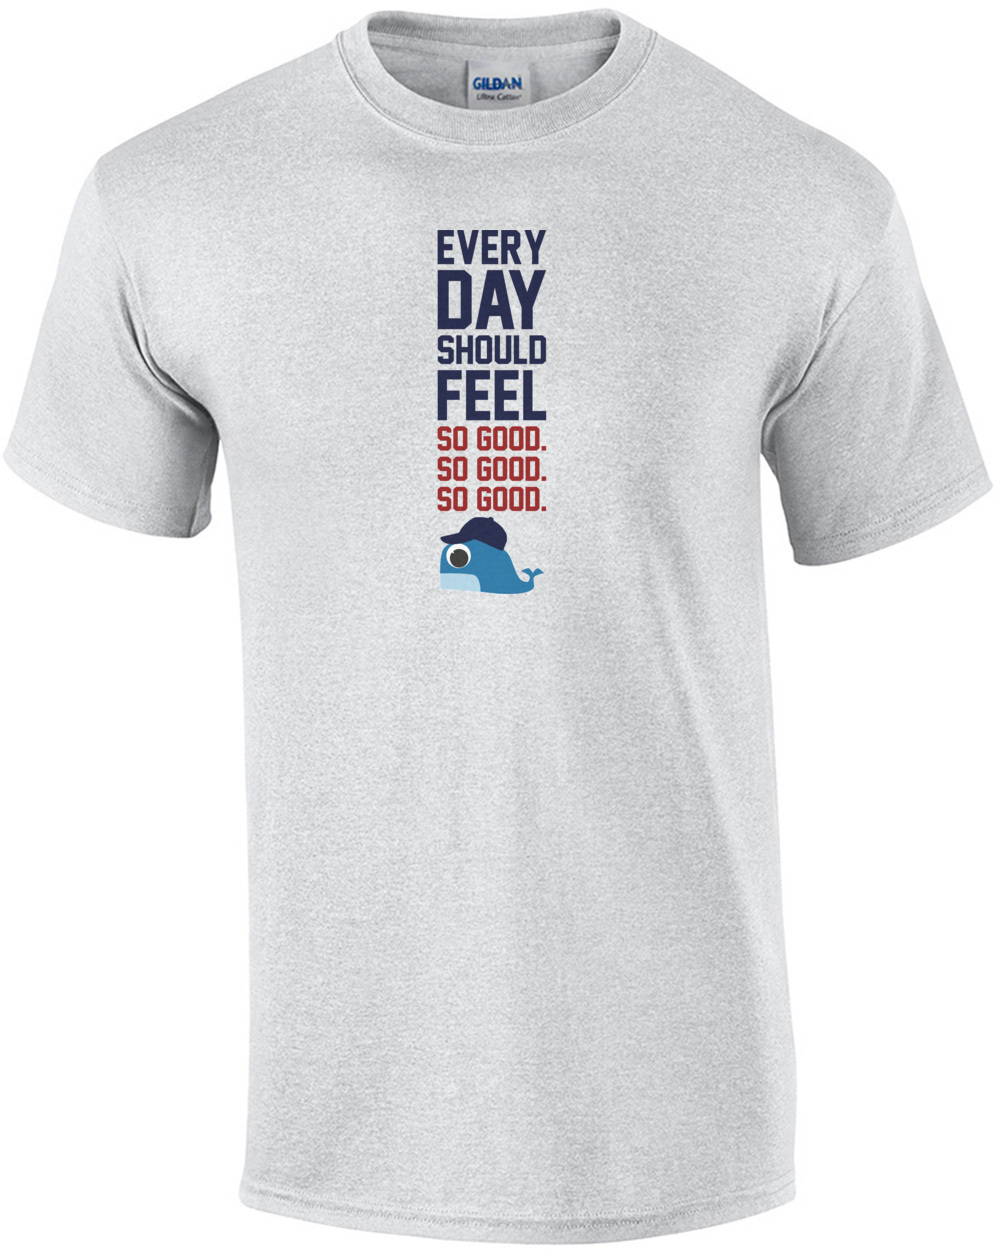 Every Day Should Feel So good. So Good. So good. Boston Red Sox T